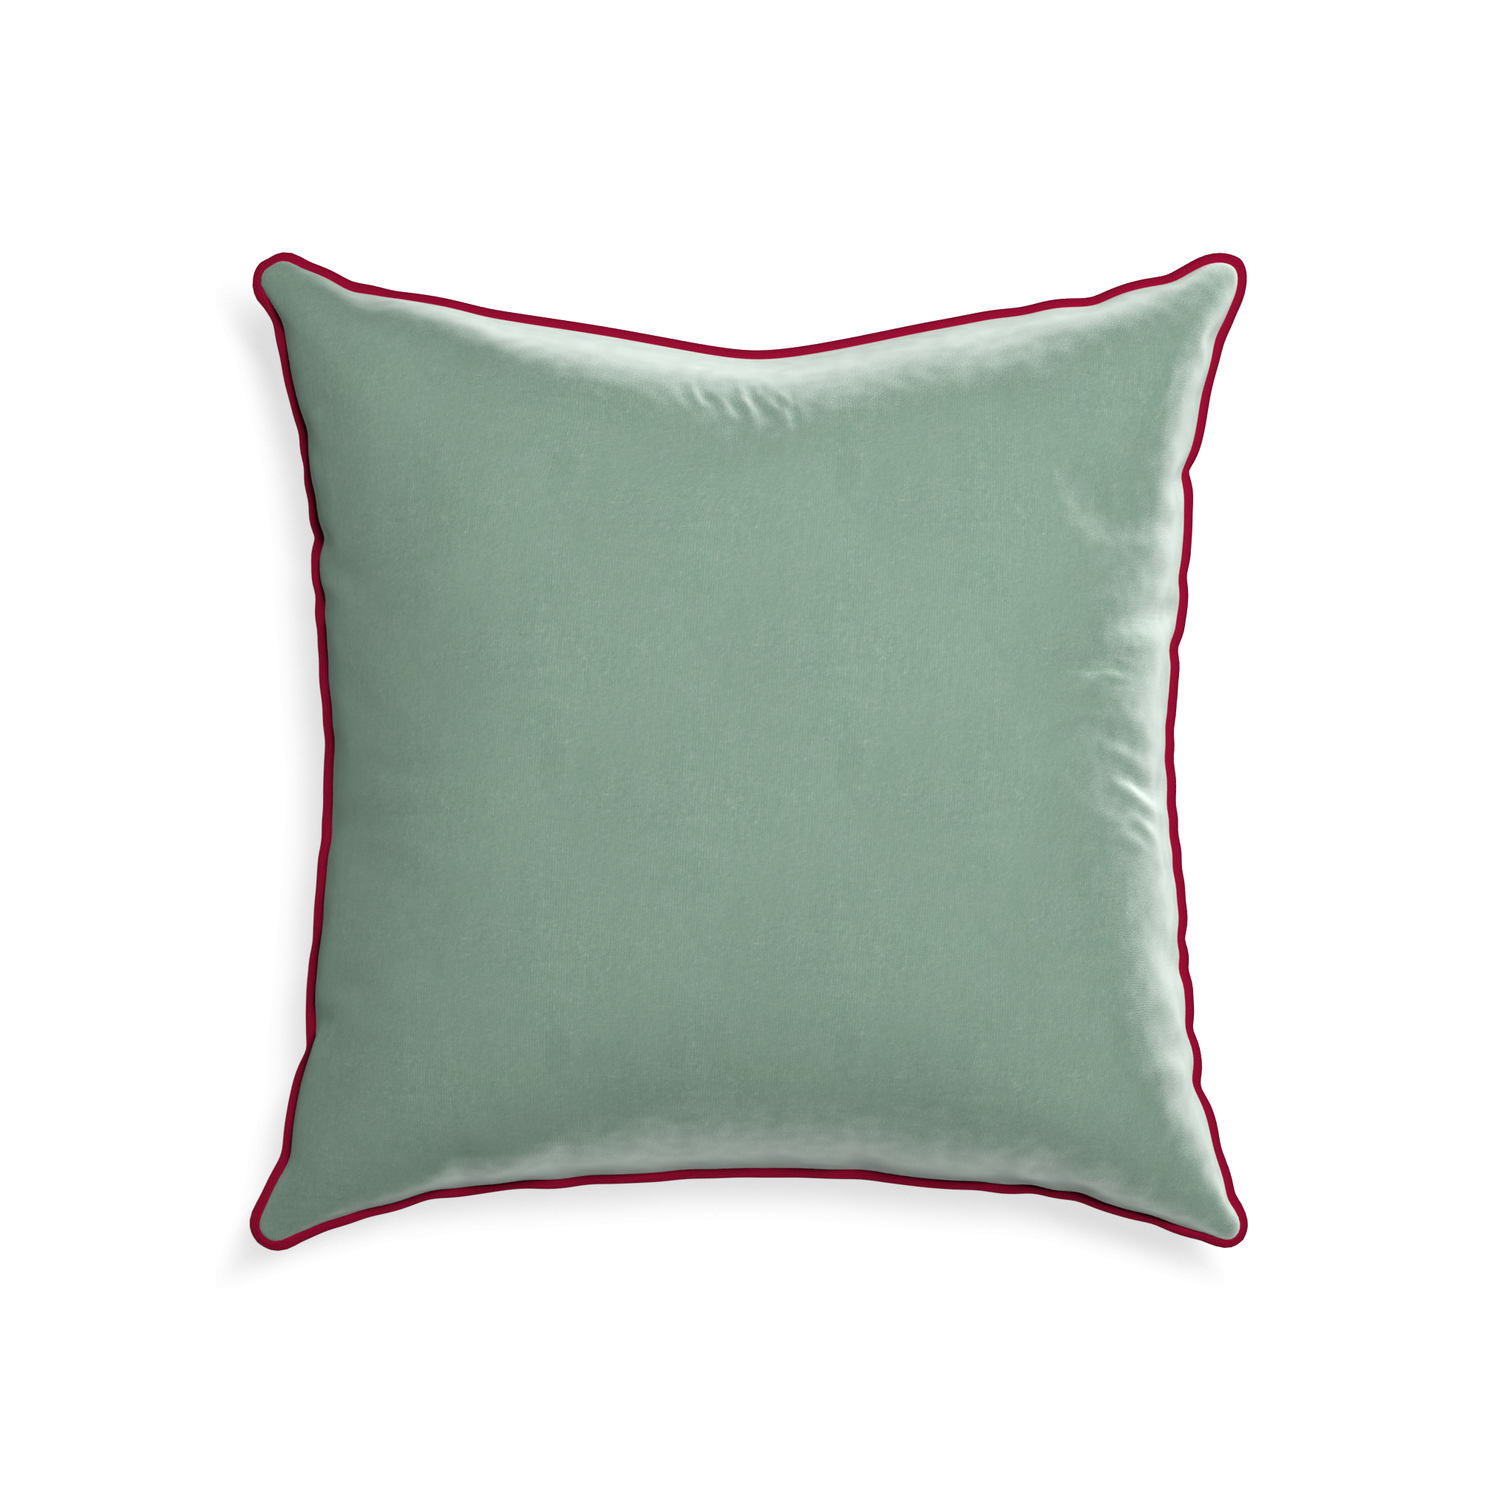 square blue green velvet pillow with dark red piping